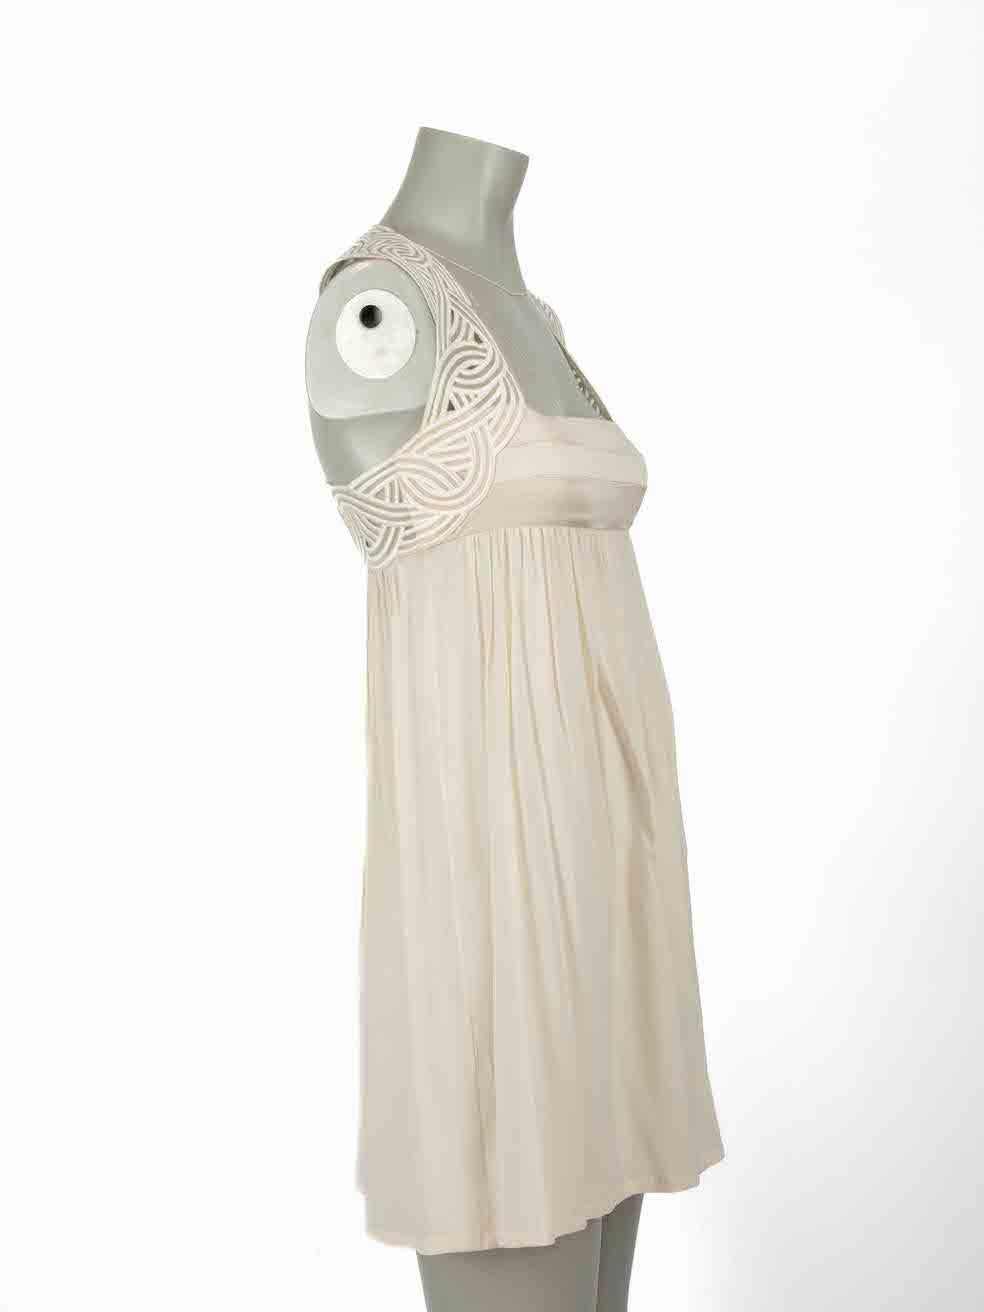 CONDITION is Never worn, with tags. No visible wear to dress is evident on this new Jasmine Di Milo designer resale item.
 
Details
Ecru
Silk
Dress
Sleeveless
Square neck
Sheer
Embroidered top detail
Mini
Side zip and hook fastening

Made in China
